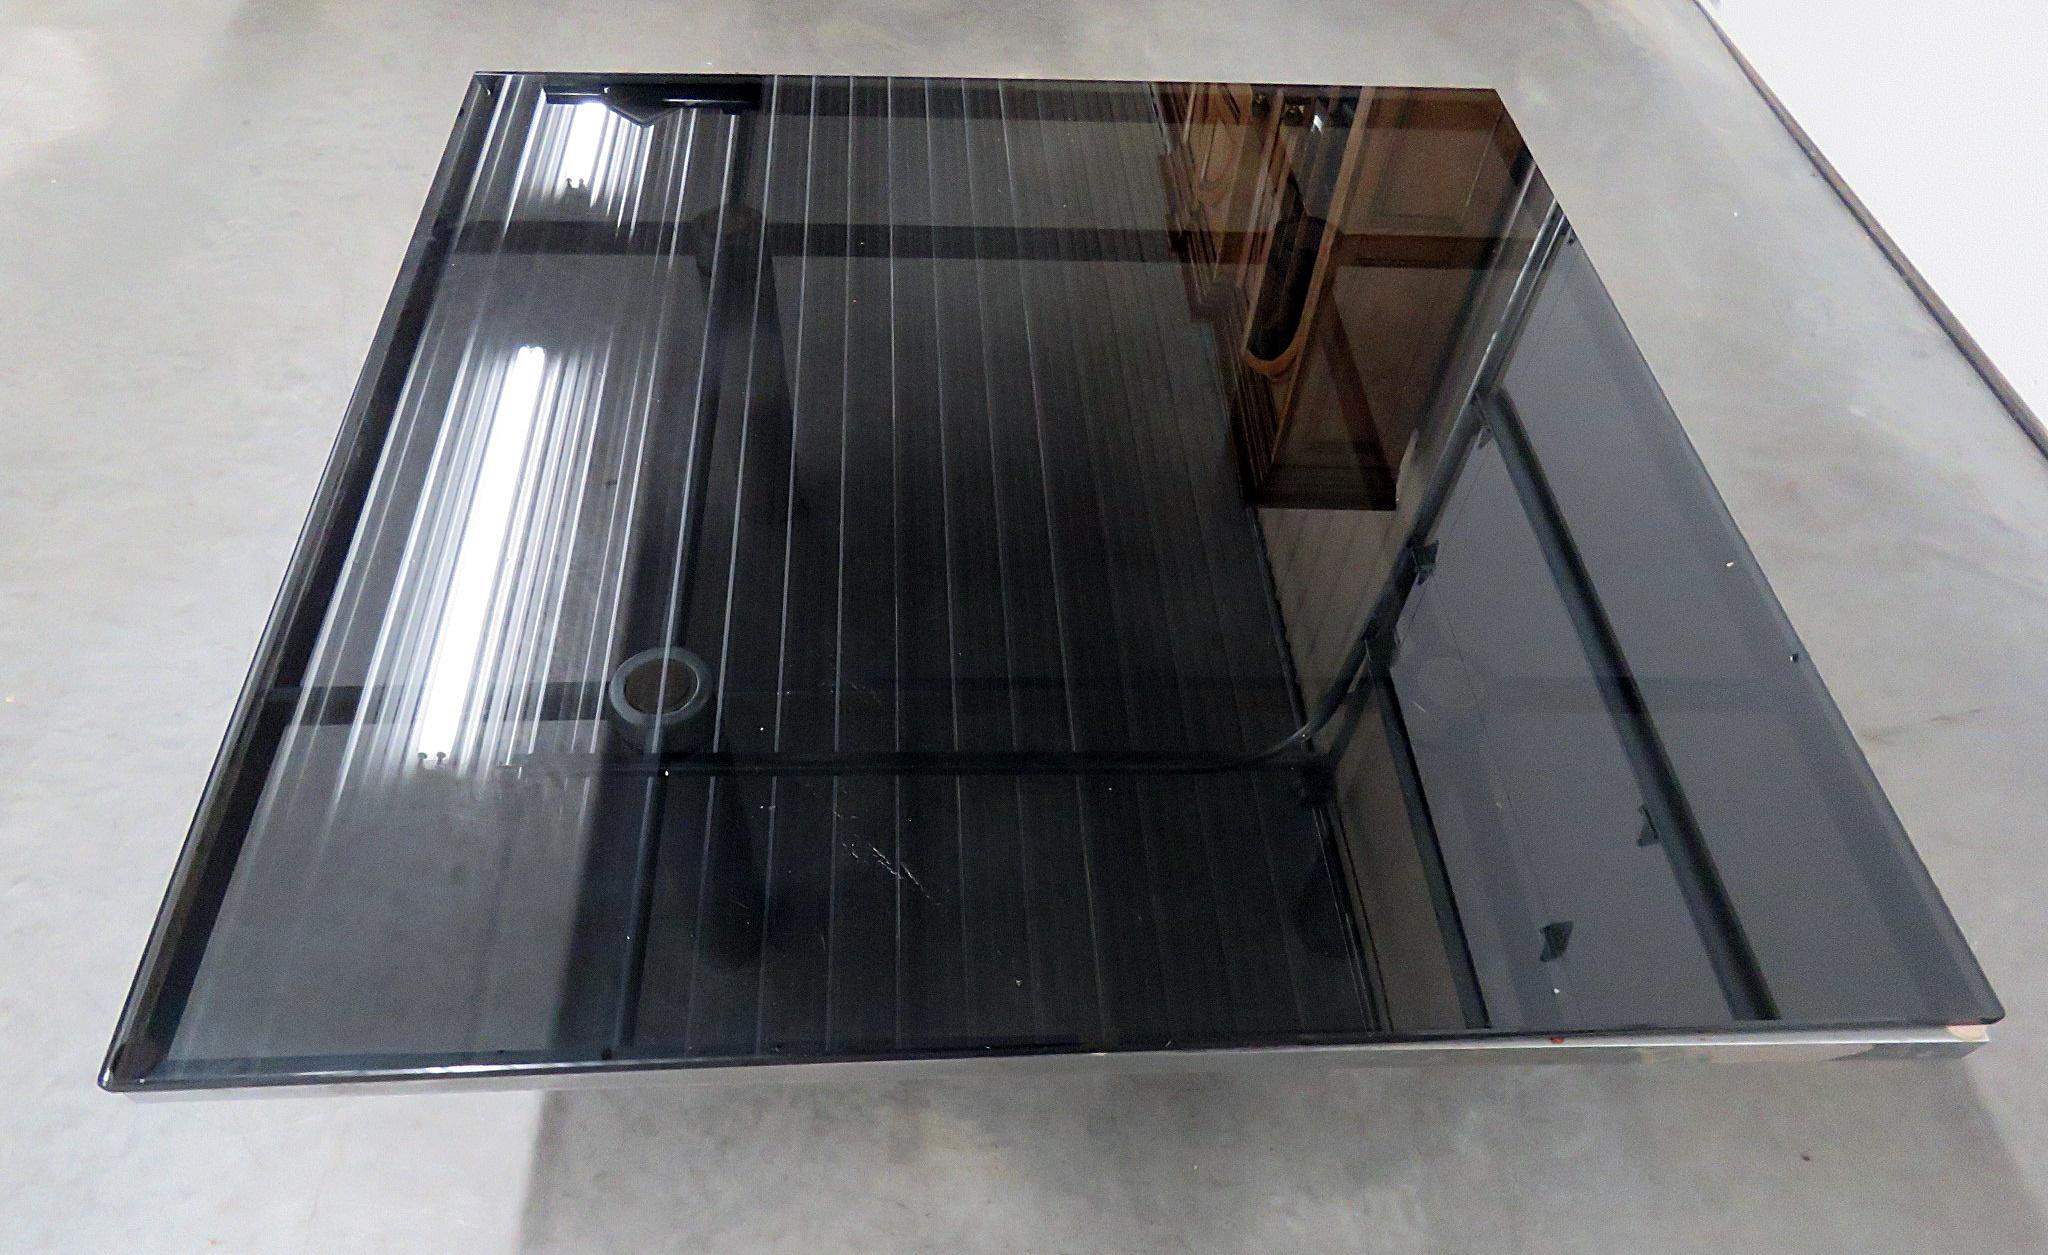 20th Century Mid-Century Modern Industrial Style Glass Top Coffee Table